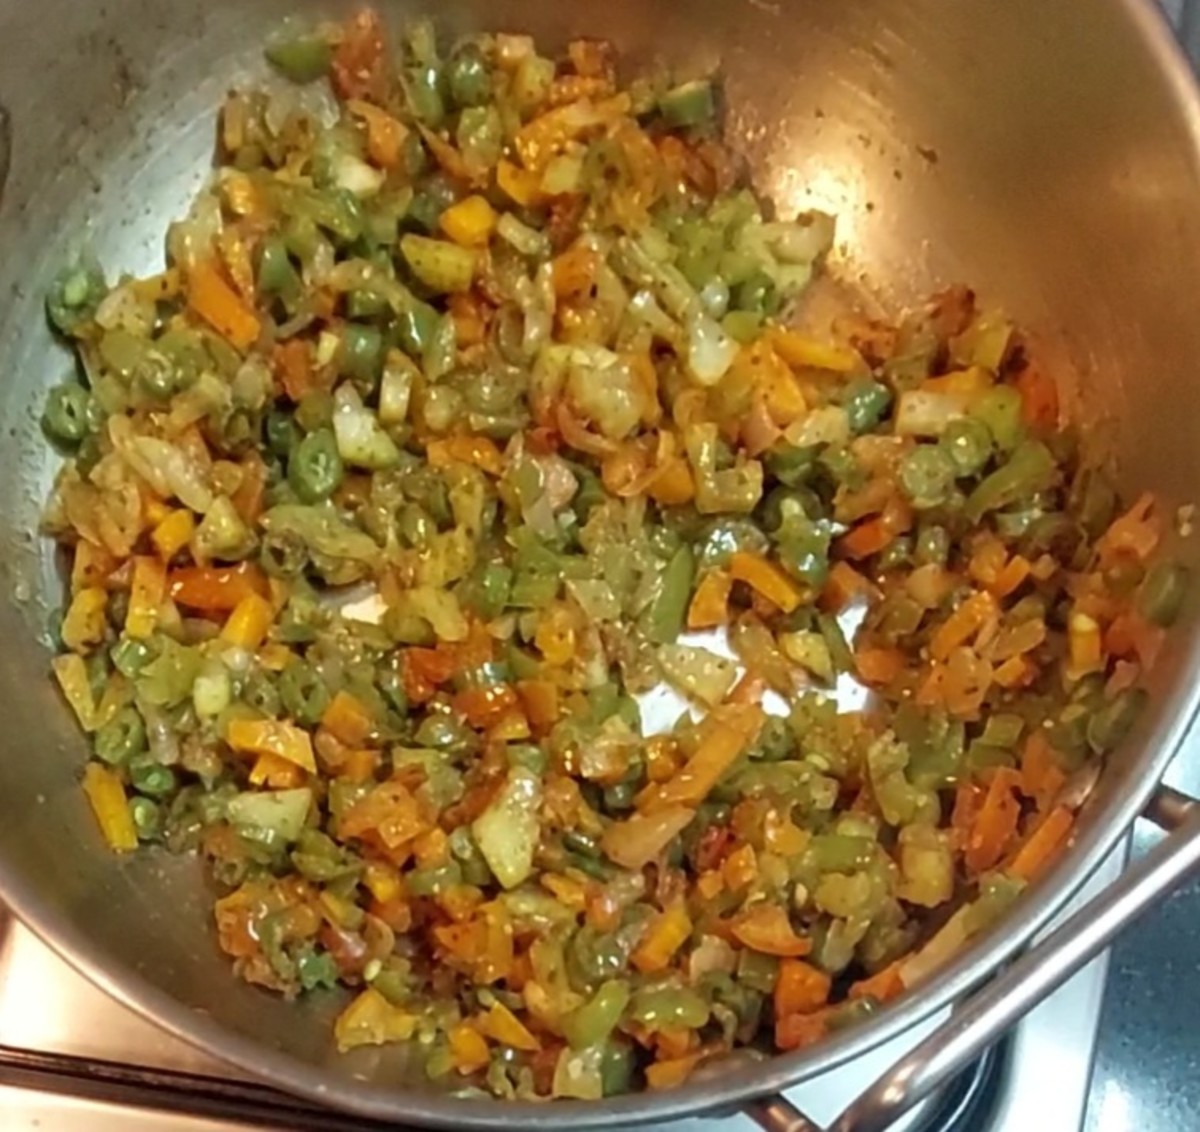 Saute till spice powders combine well with the vegetables.